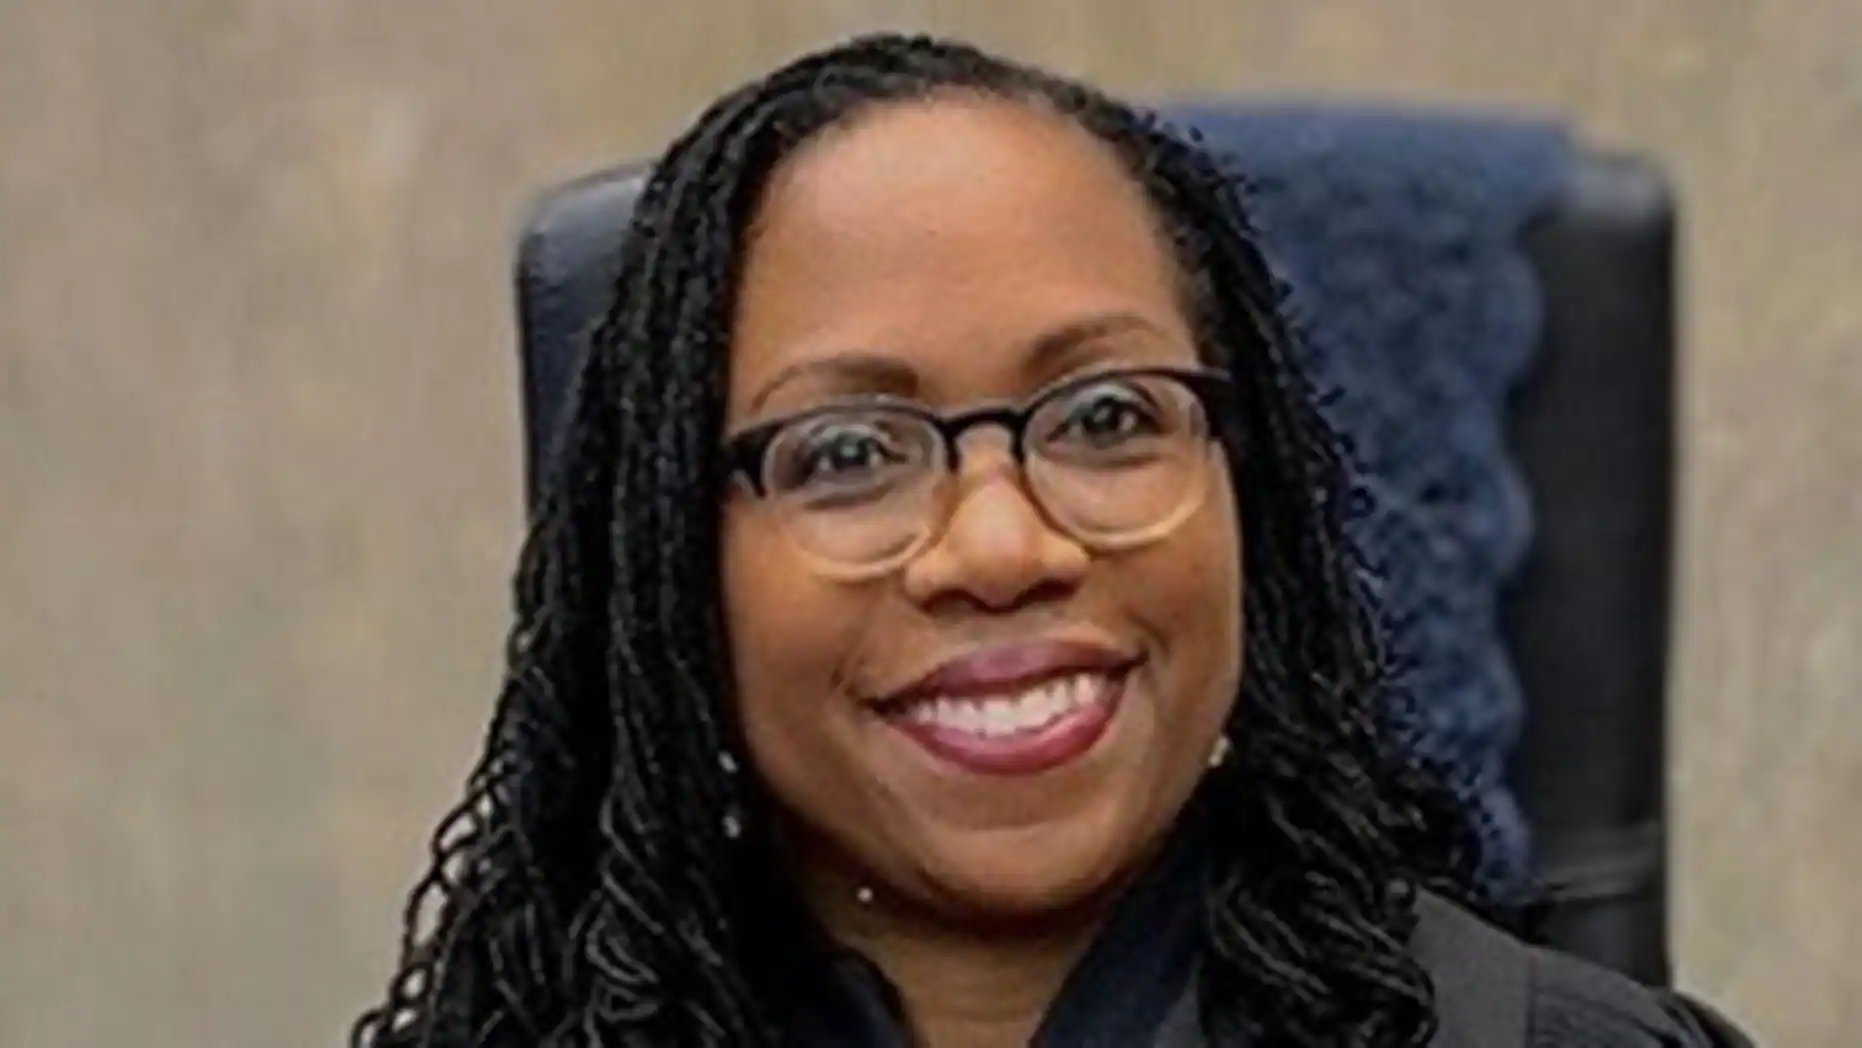 D.C. District Court Judge Ketanji Brown Jackson is President Biden's nominee to replace Attorney General Garland on the D.C. Circuit Court. (Uscourts.gov)